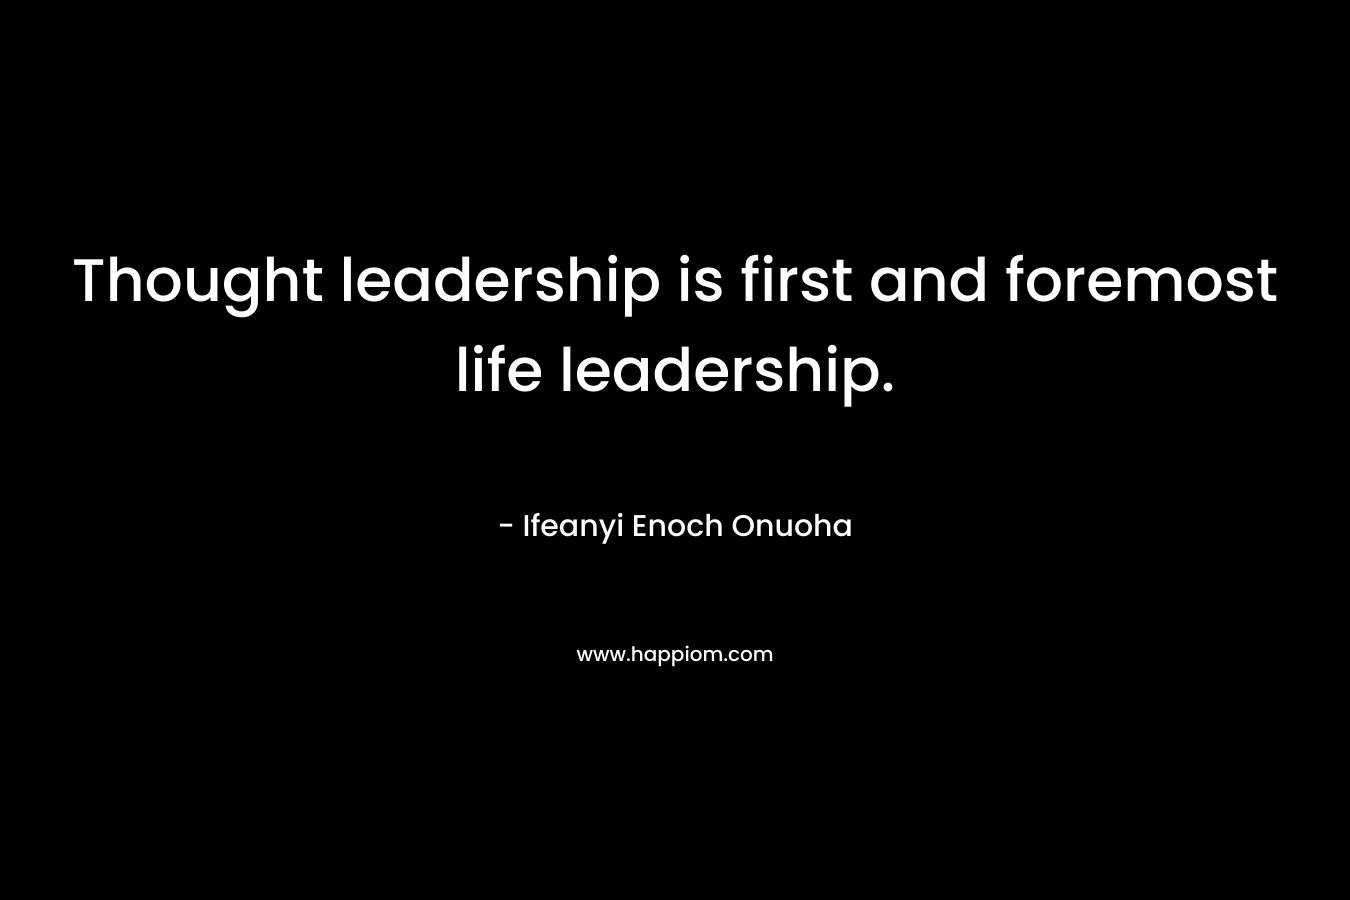 Thought leadership is first and foremost life leadership.